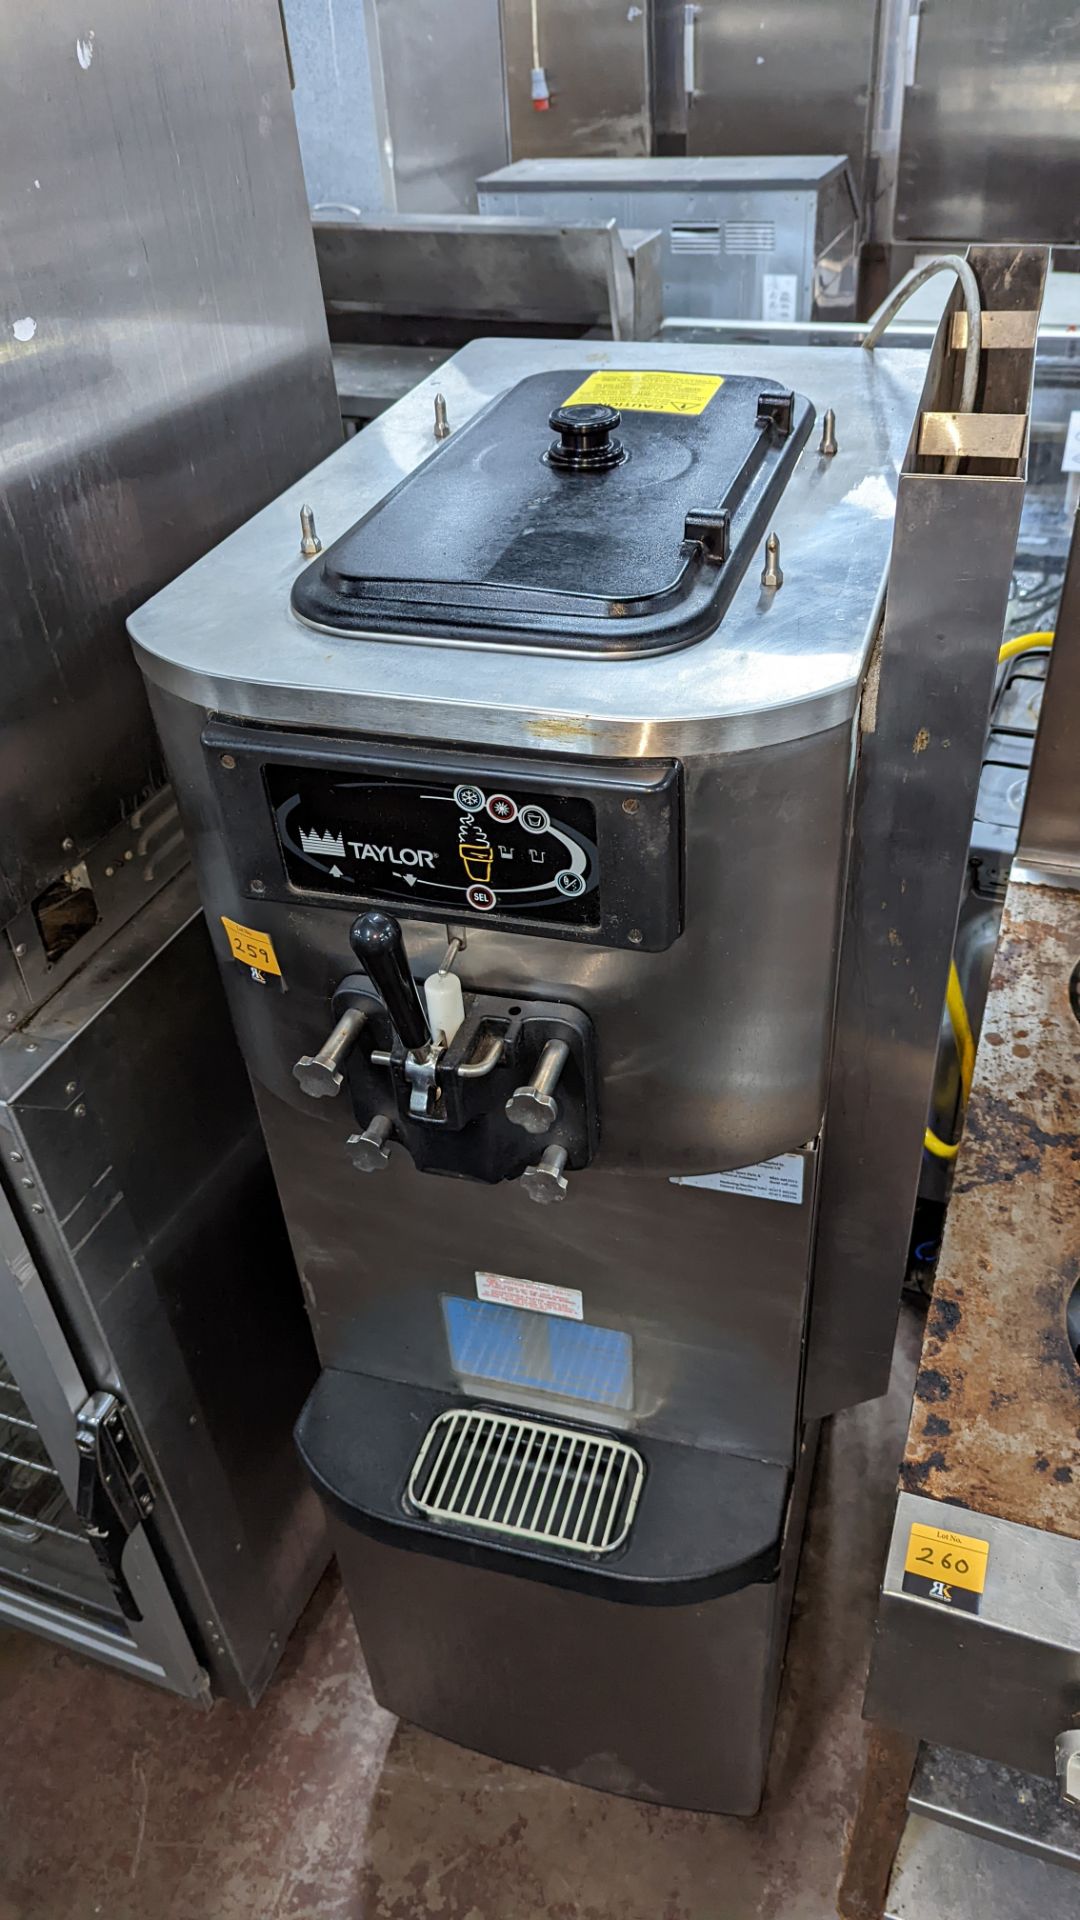 Taylor mobile stainless steel floor standing soft serve ice cream machine model C709-40 - Image 8 of 8